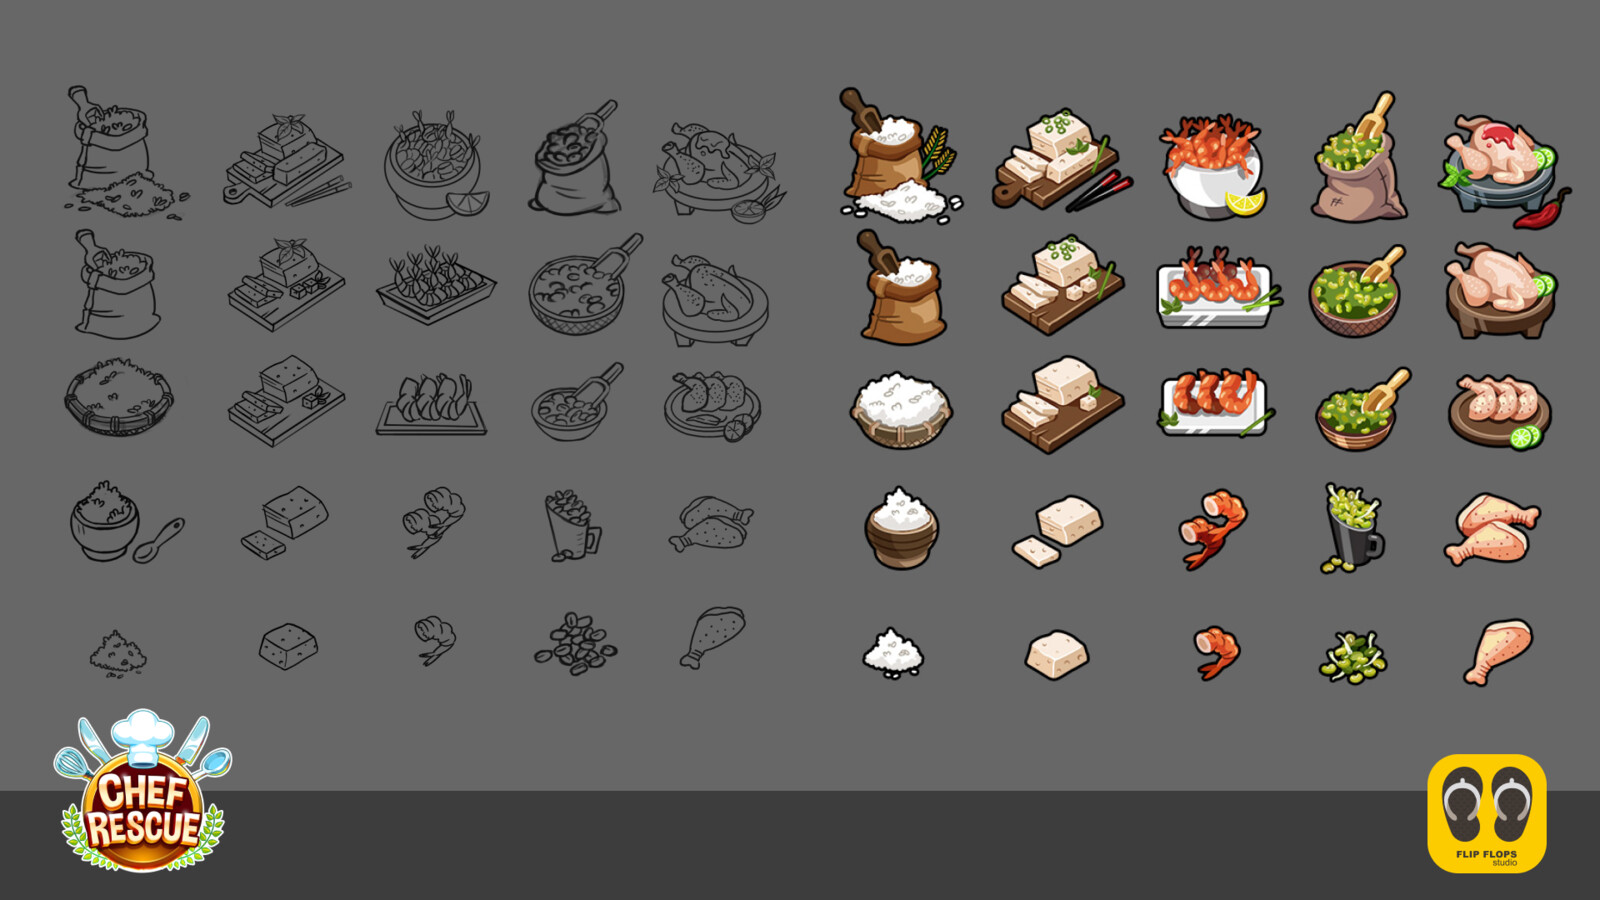 Study and final art of the ingredients.